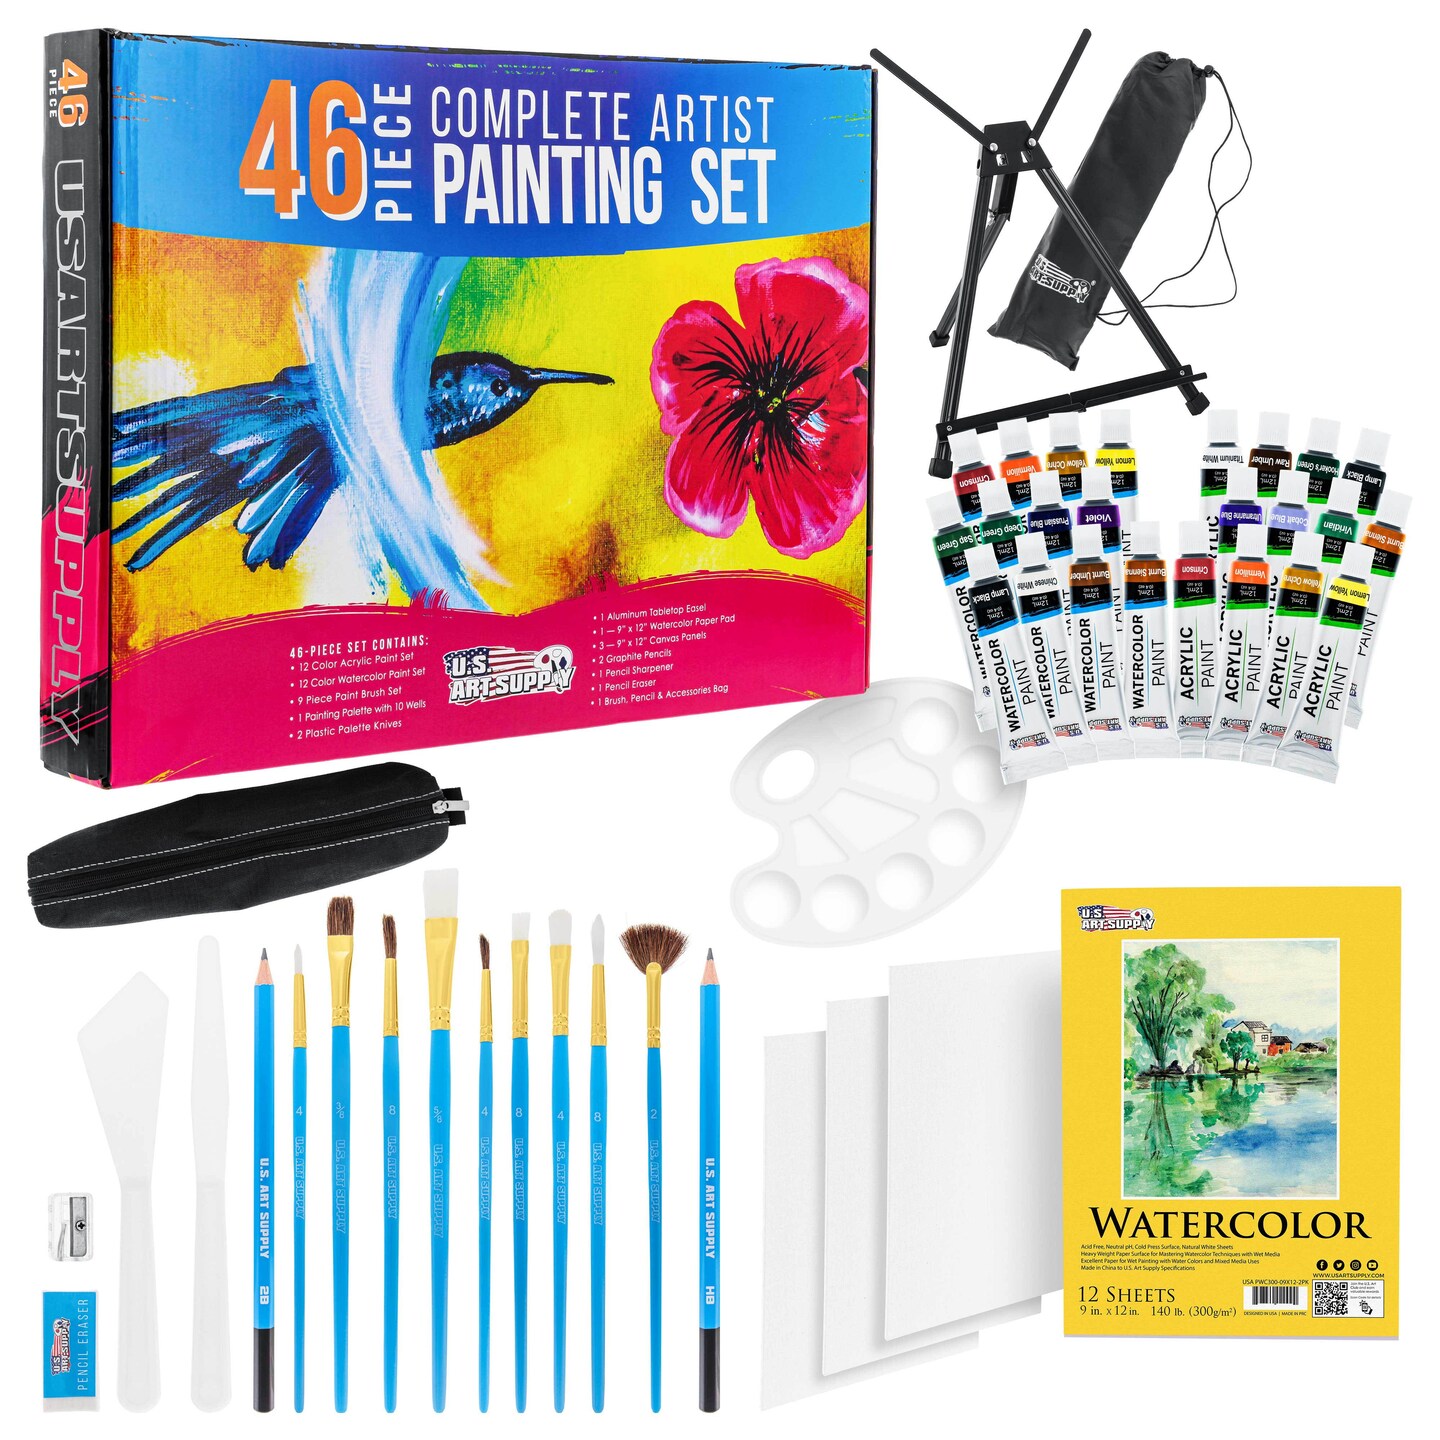 Painting Supplies Set, 49-Piece Watercolor Painting Kit with